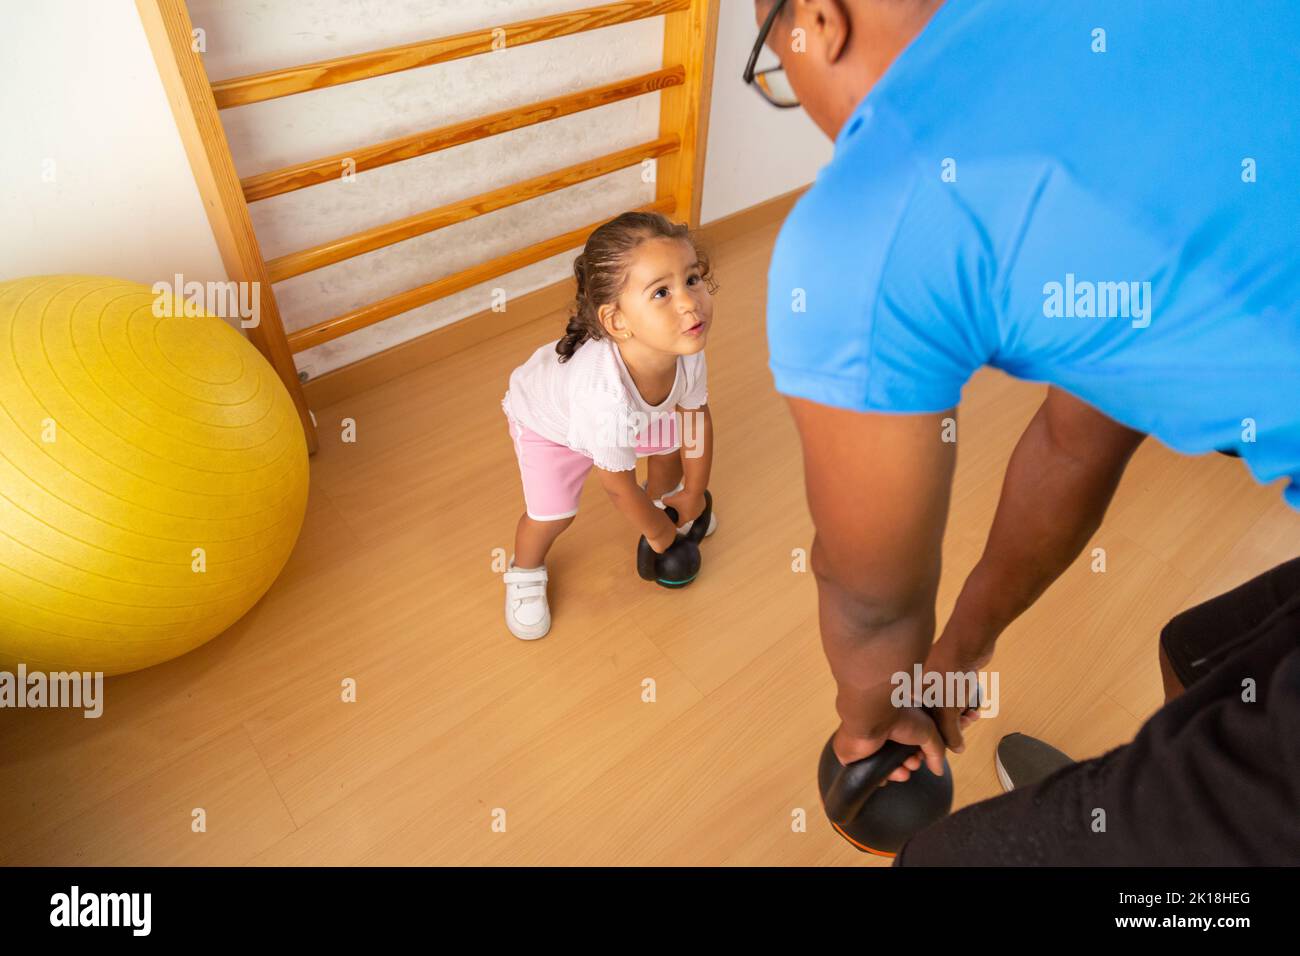 Little kid lifting kettlebell with father Stock Photo